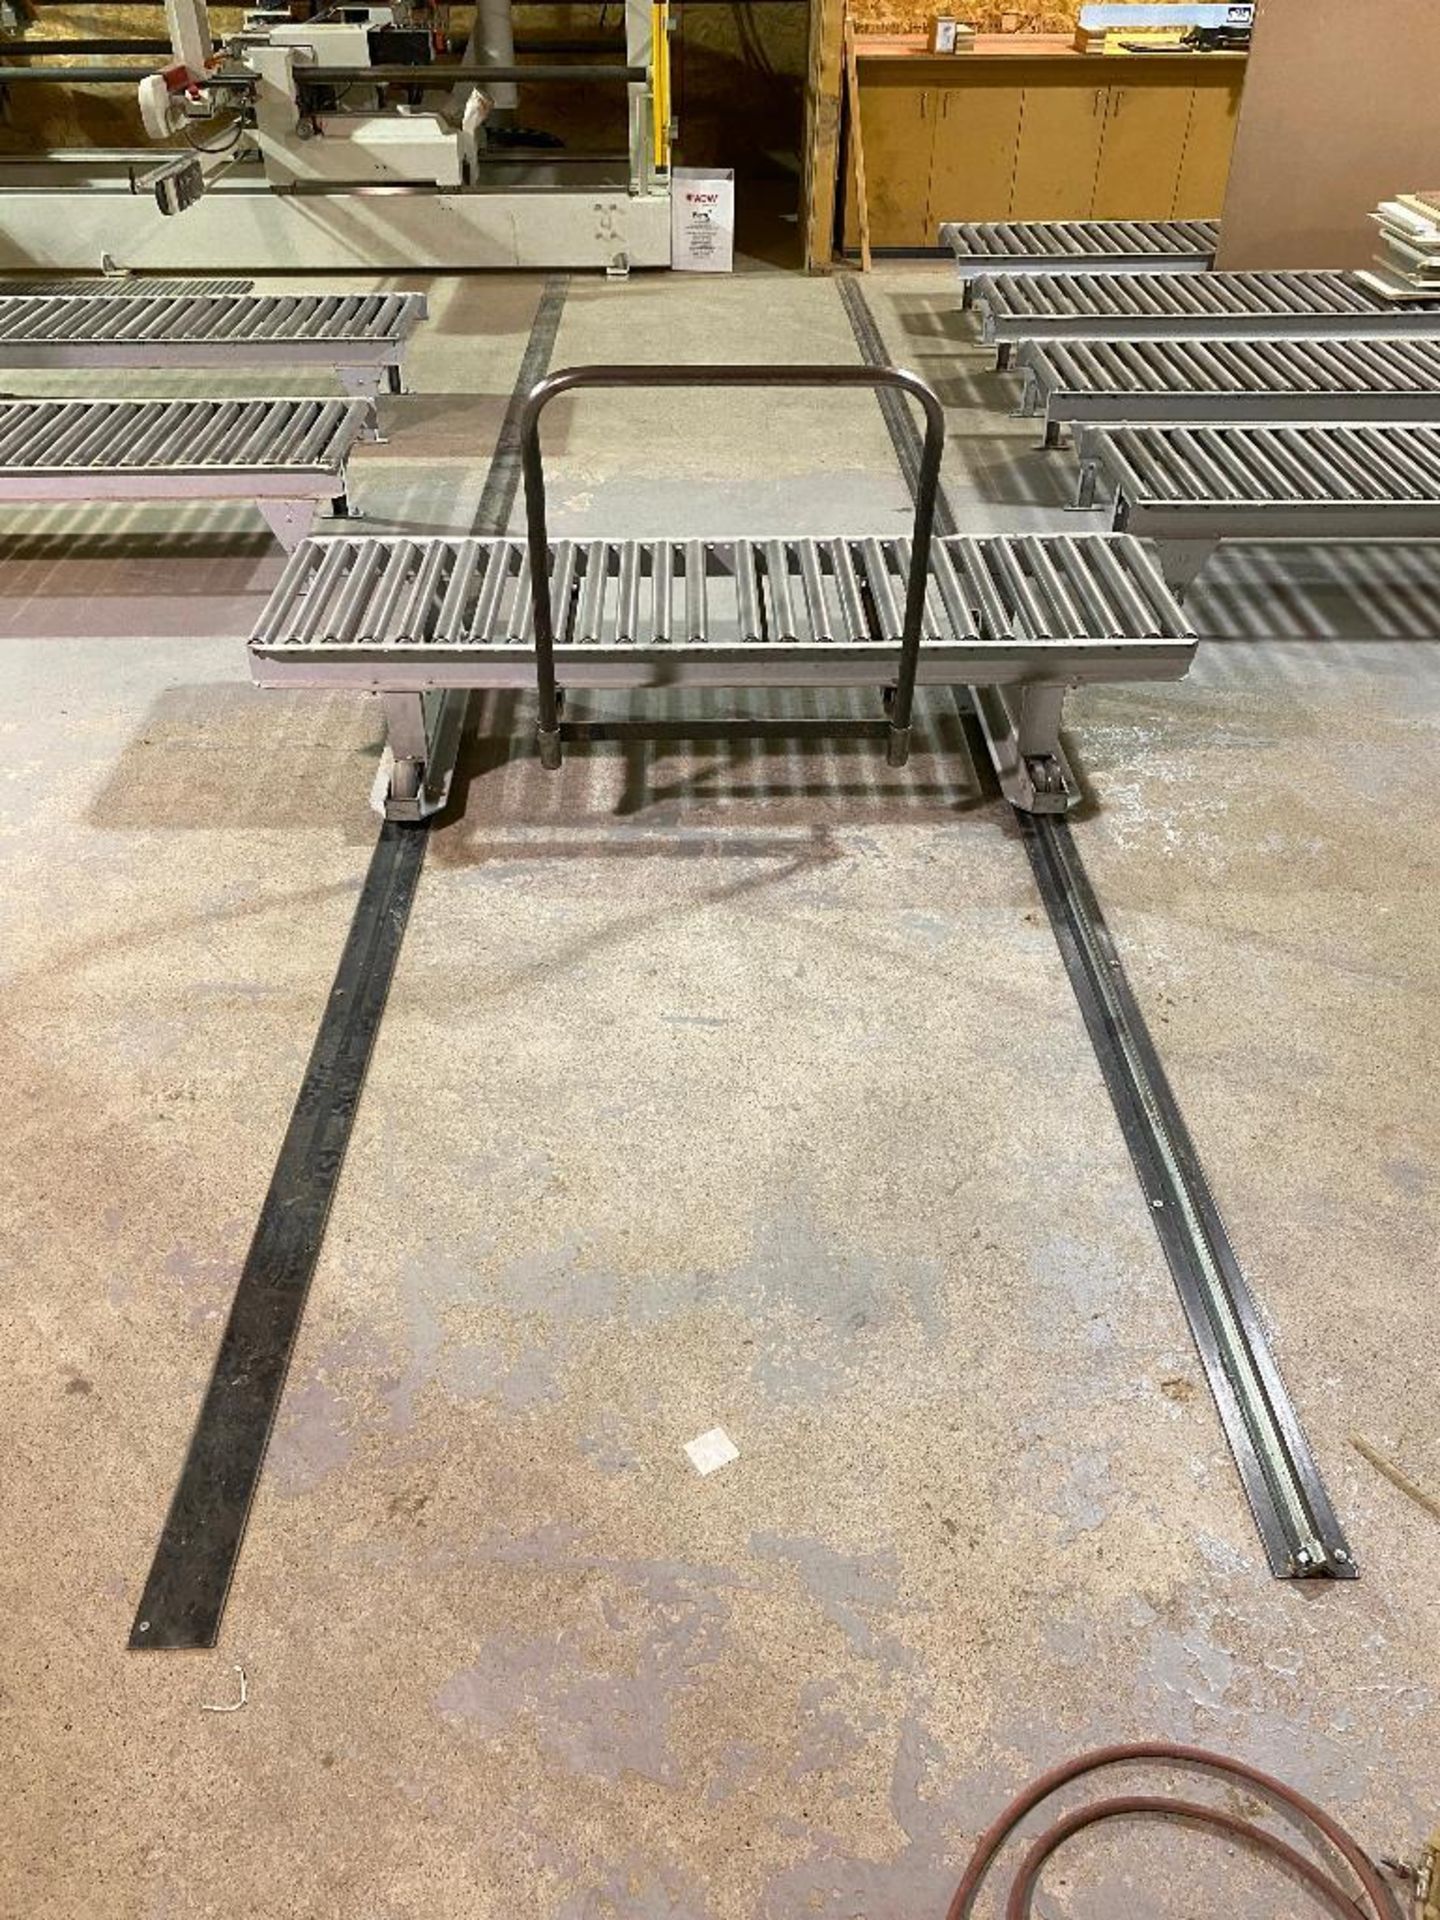 78" X 24" Mobile Roller Conveyor w/ Approx. 22' Track - Image 3 of 3